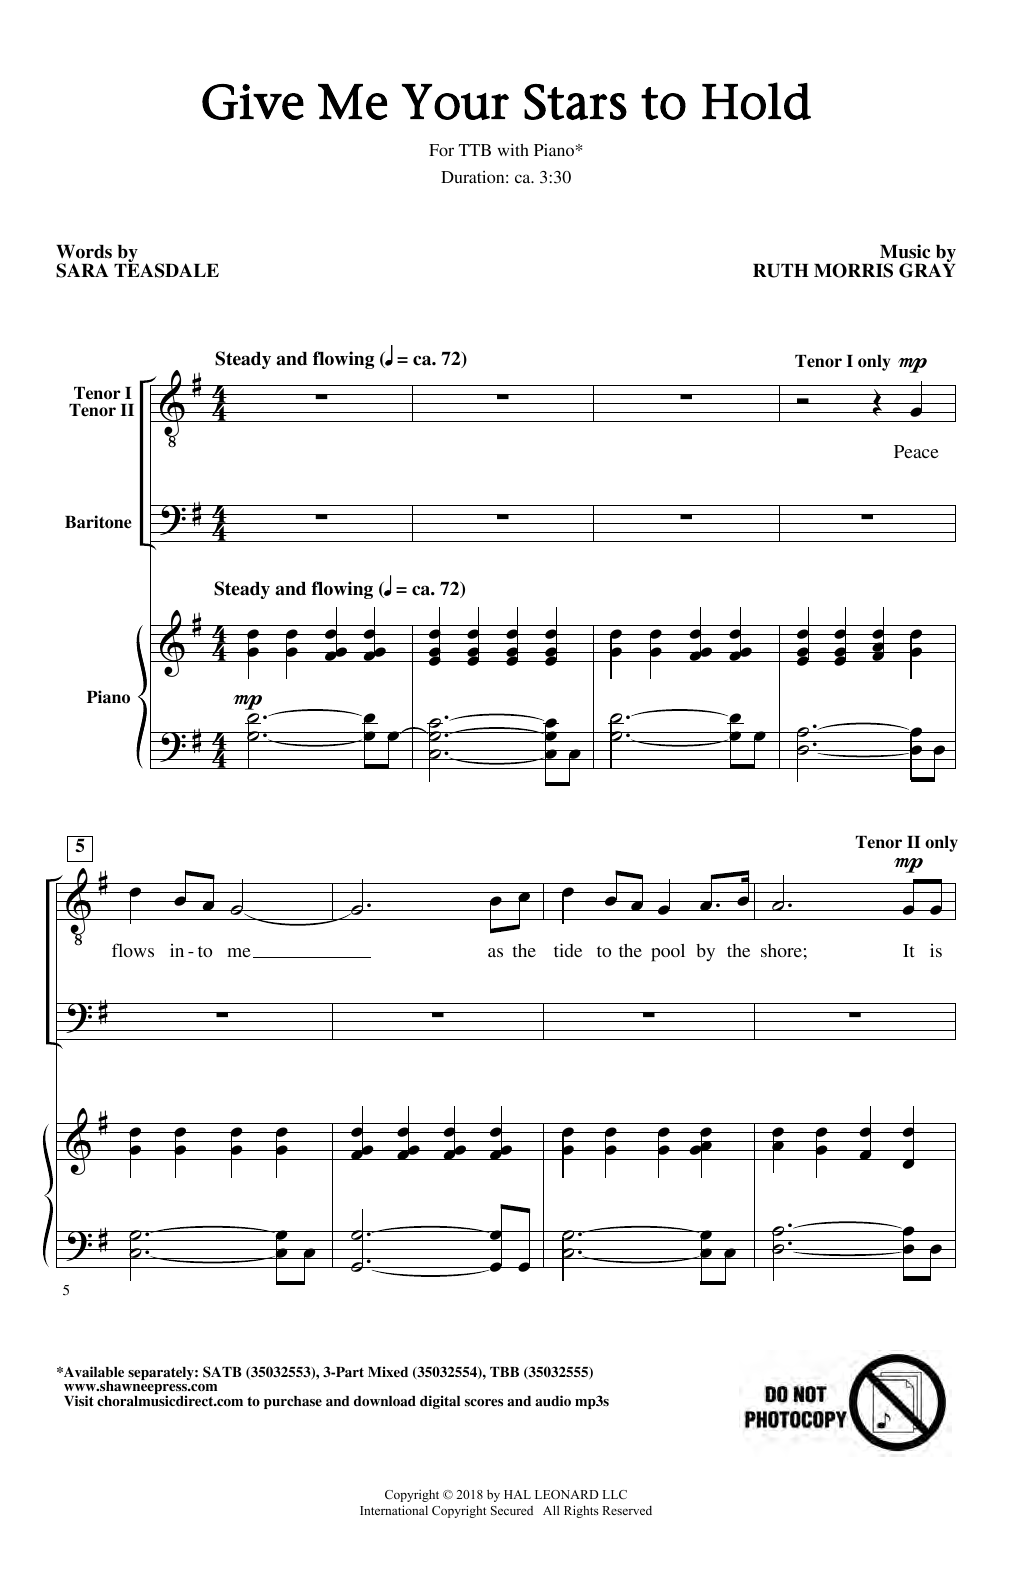 Download Ruth Morris Gray Give Me Your Stars To Hold Sheet Music